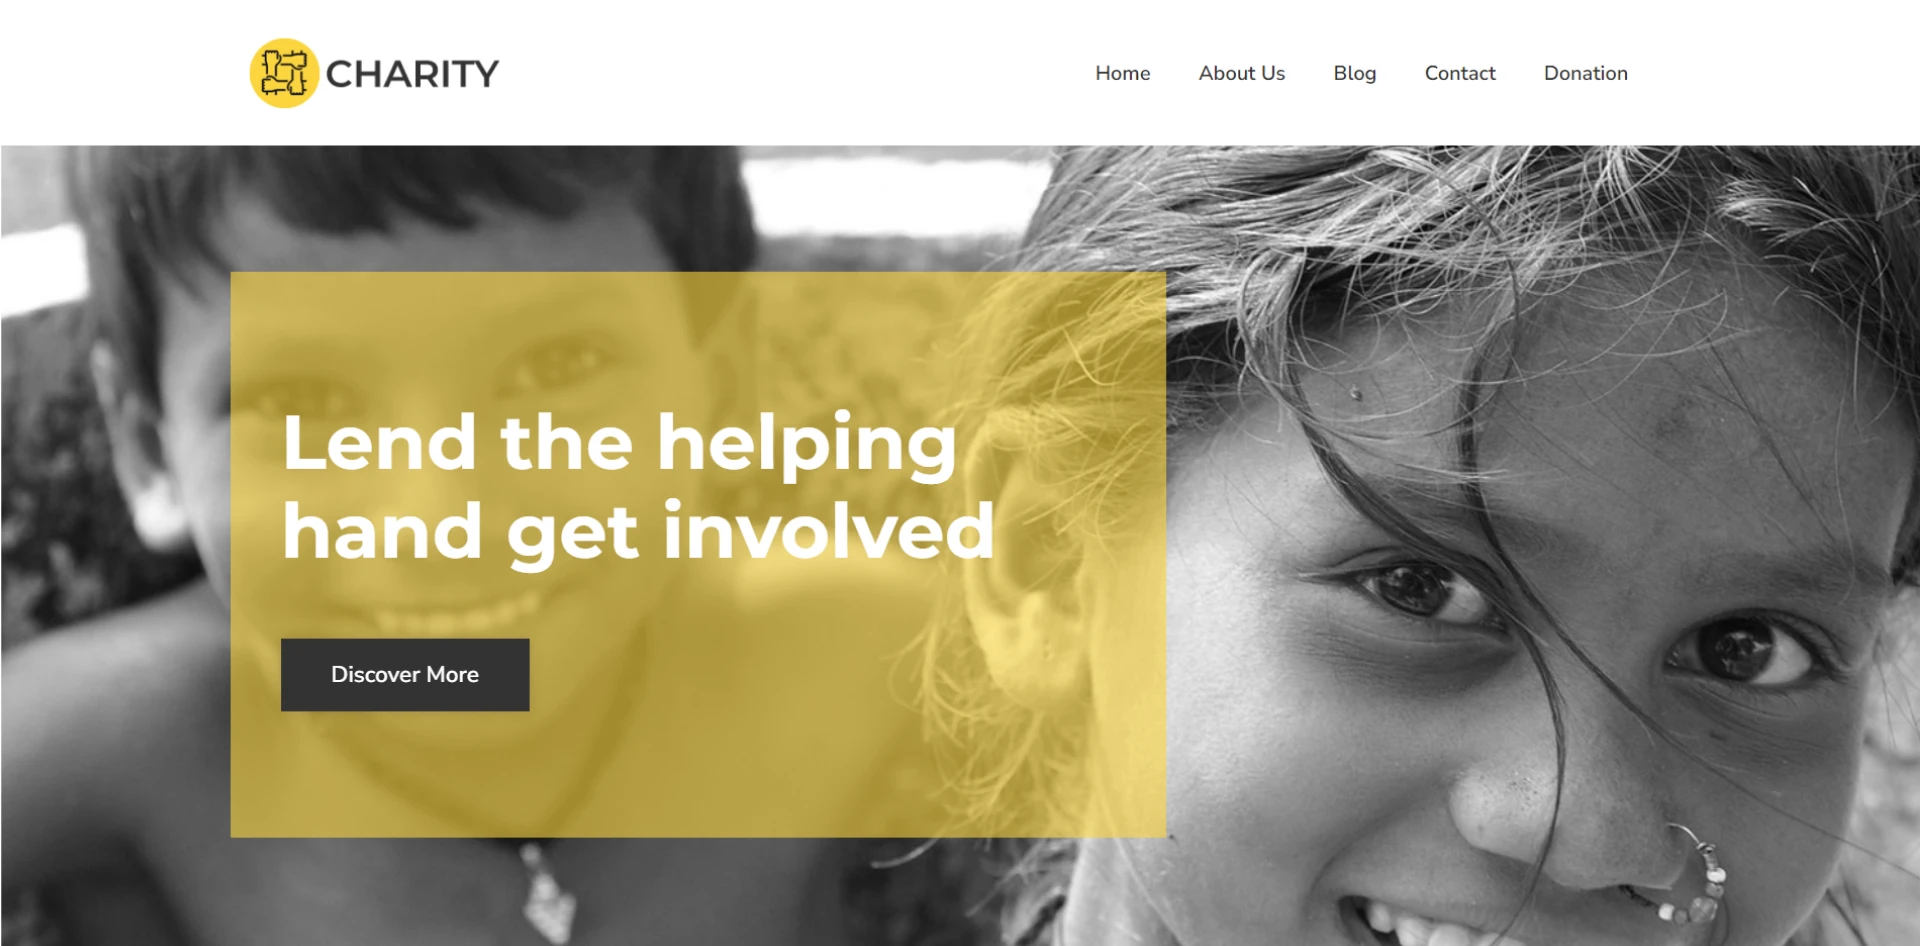 charity website templates